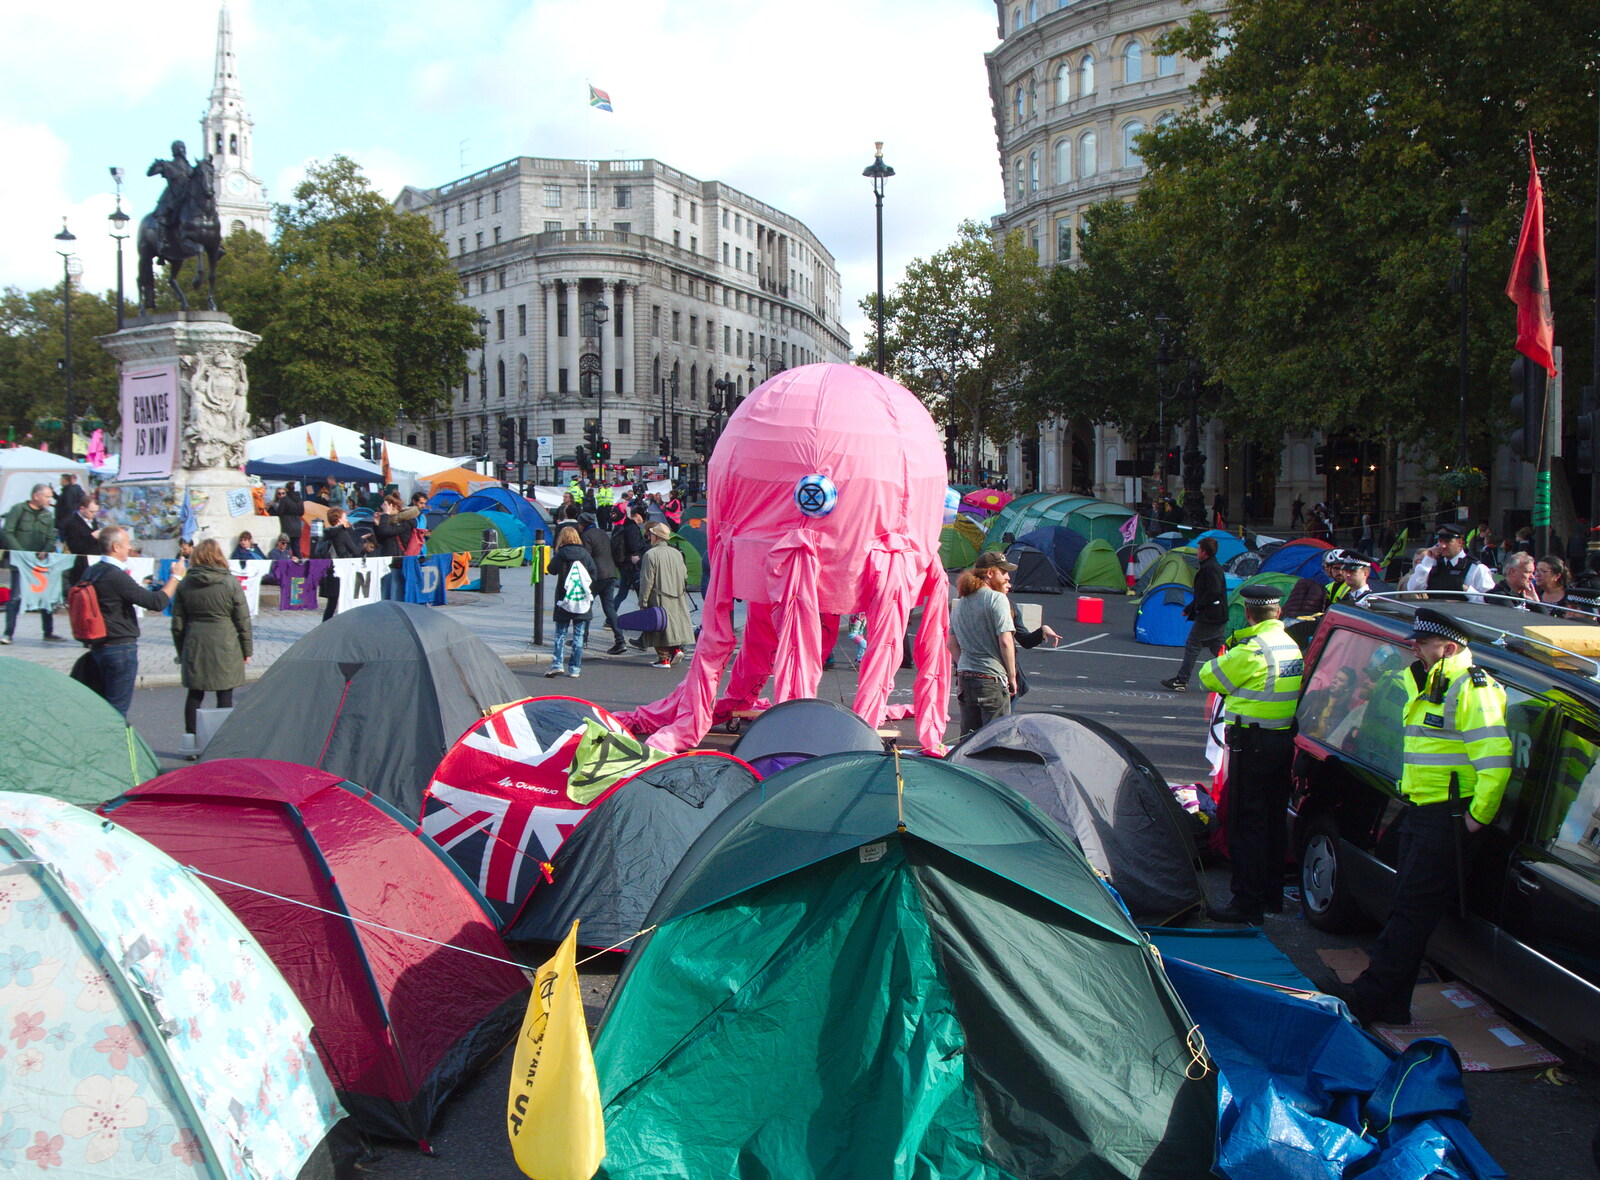 There's also a new pink octopus floating around from The Extinction Rebellion Protest, Westminster, London - 9th October 2019